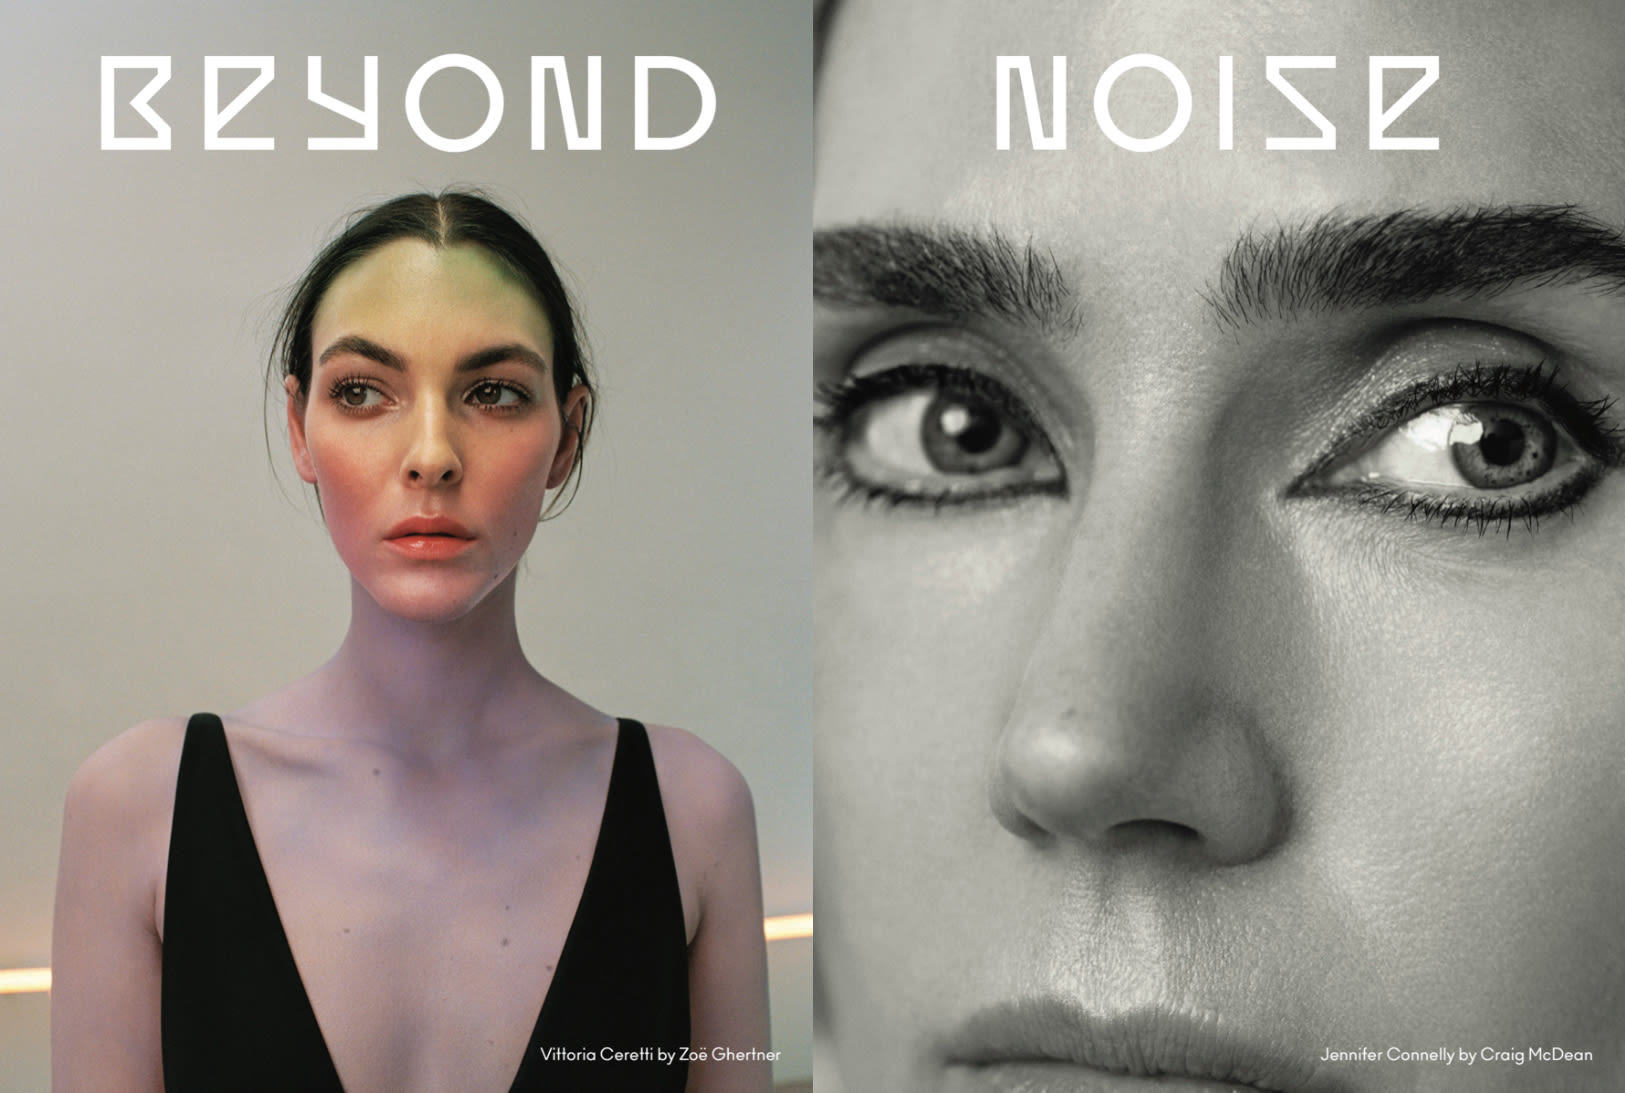 Why ‘Beyond Noise’ Is Pushing for a New Voice in Women’s Magazines